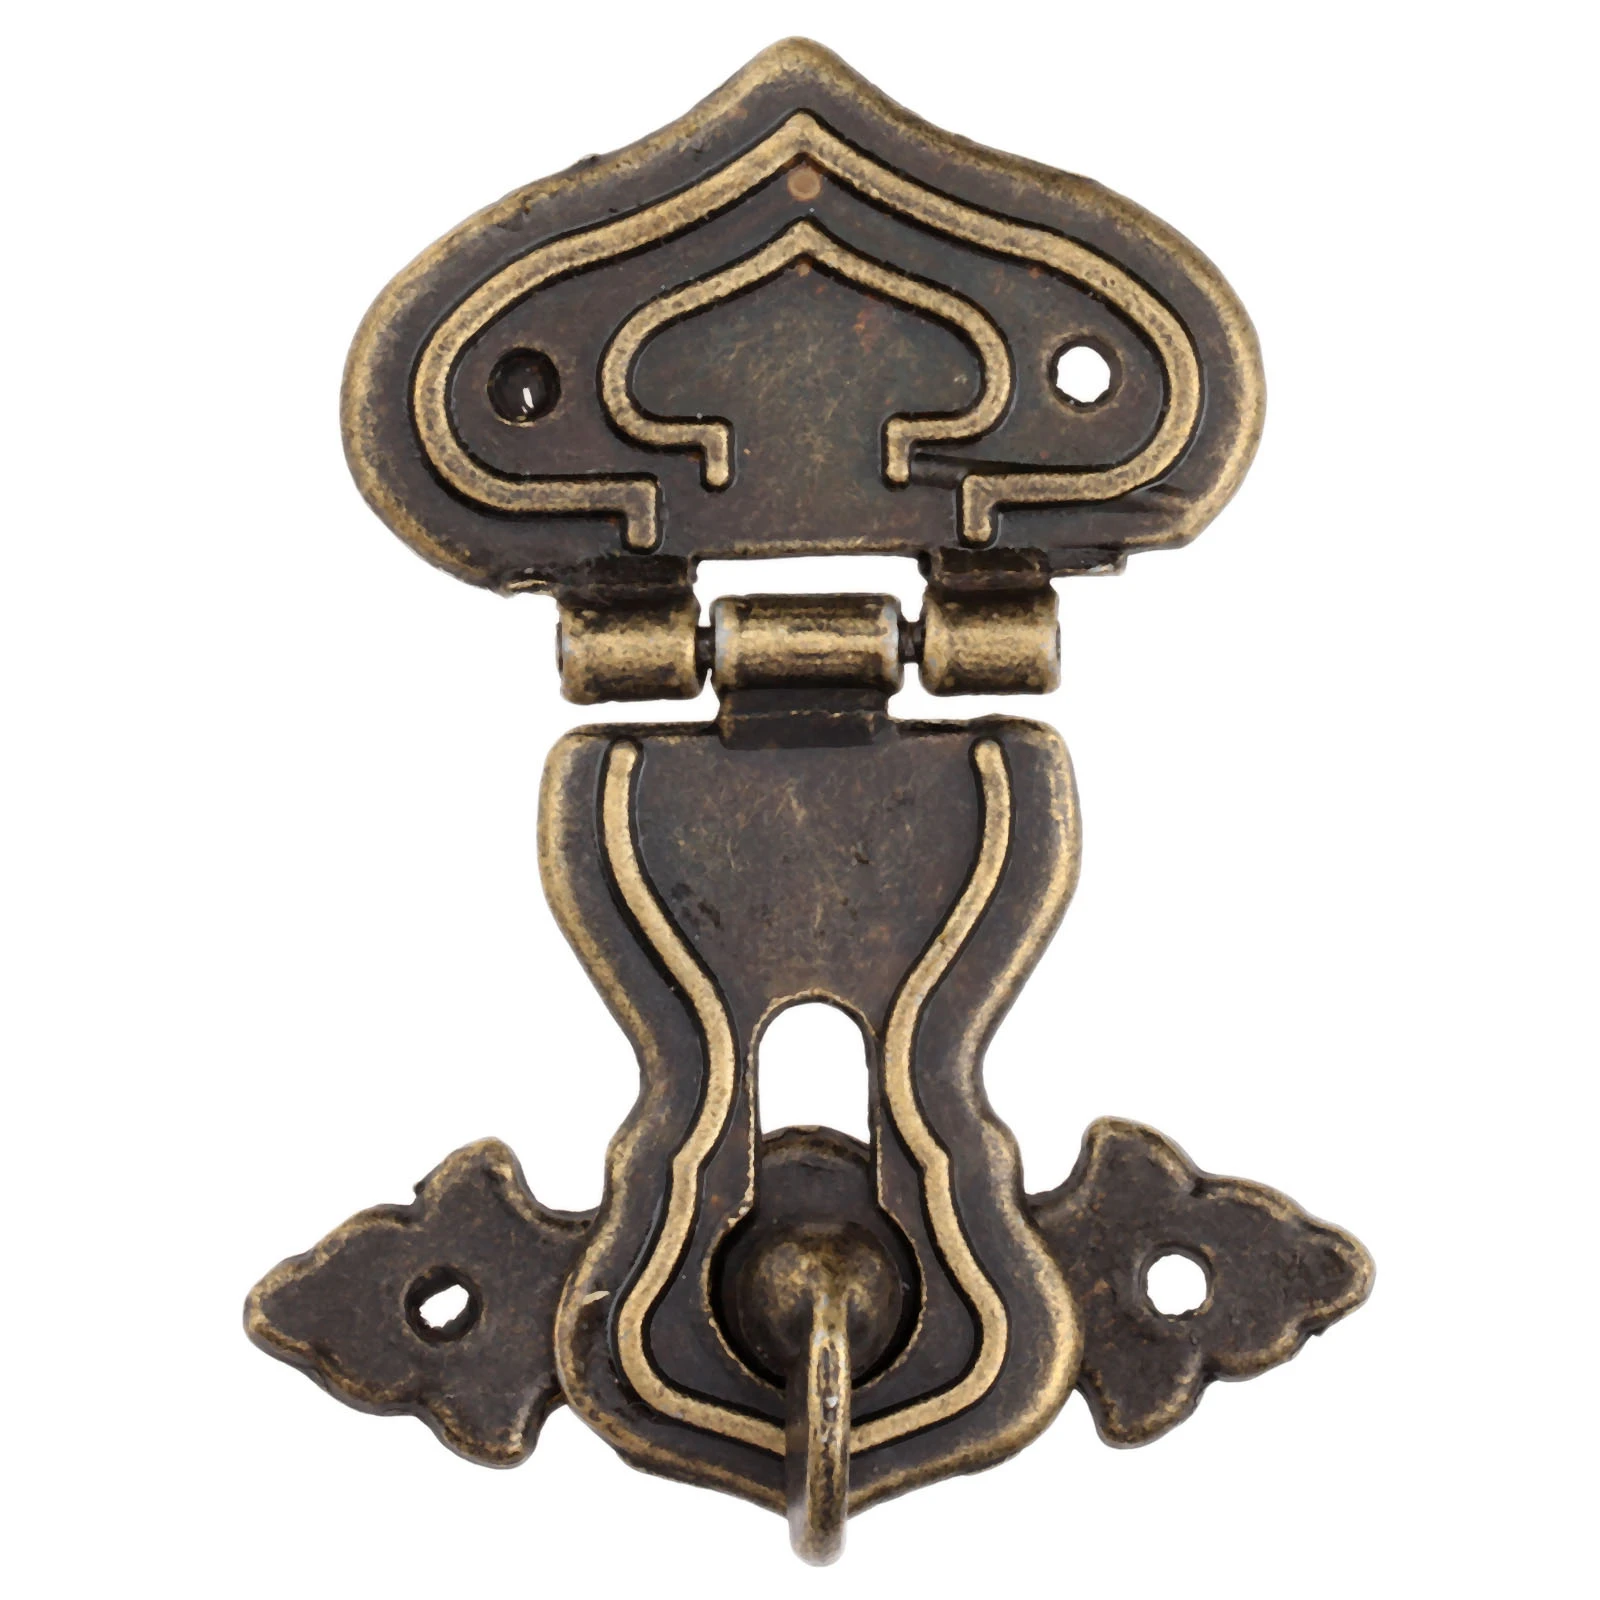 5 Sets Antique Brass Latch Hasps Decorative Bronze Vintage Locks with Screws for Jewelry Case Wooden Boxes 